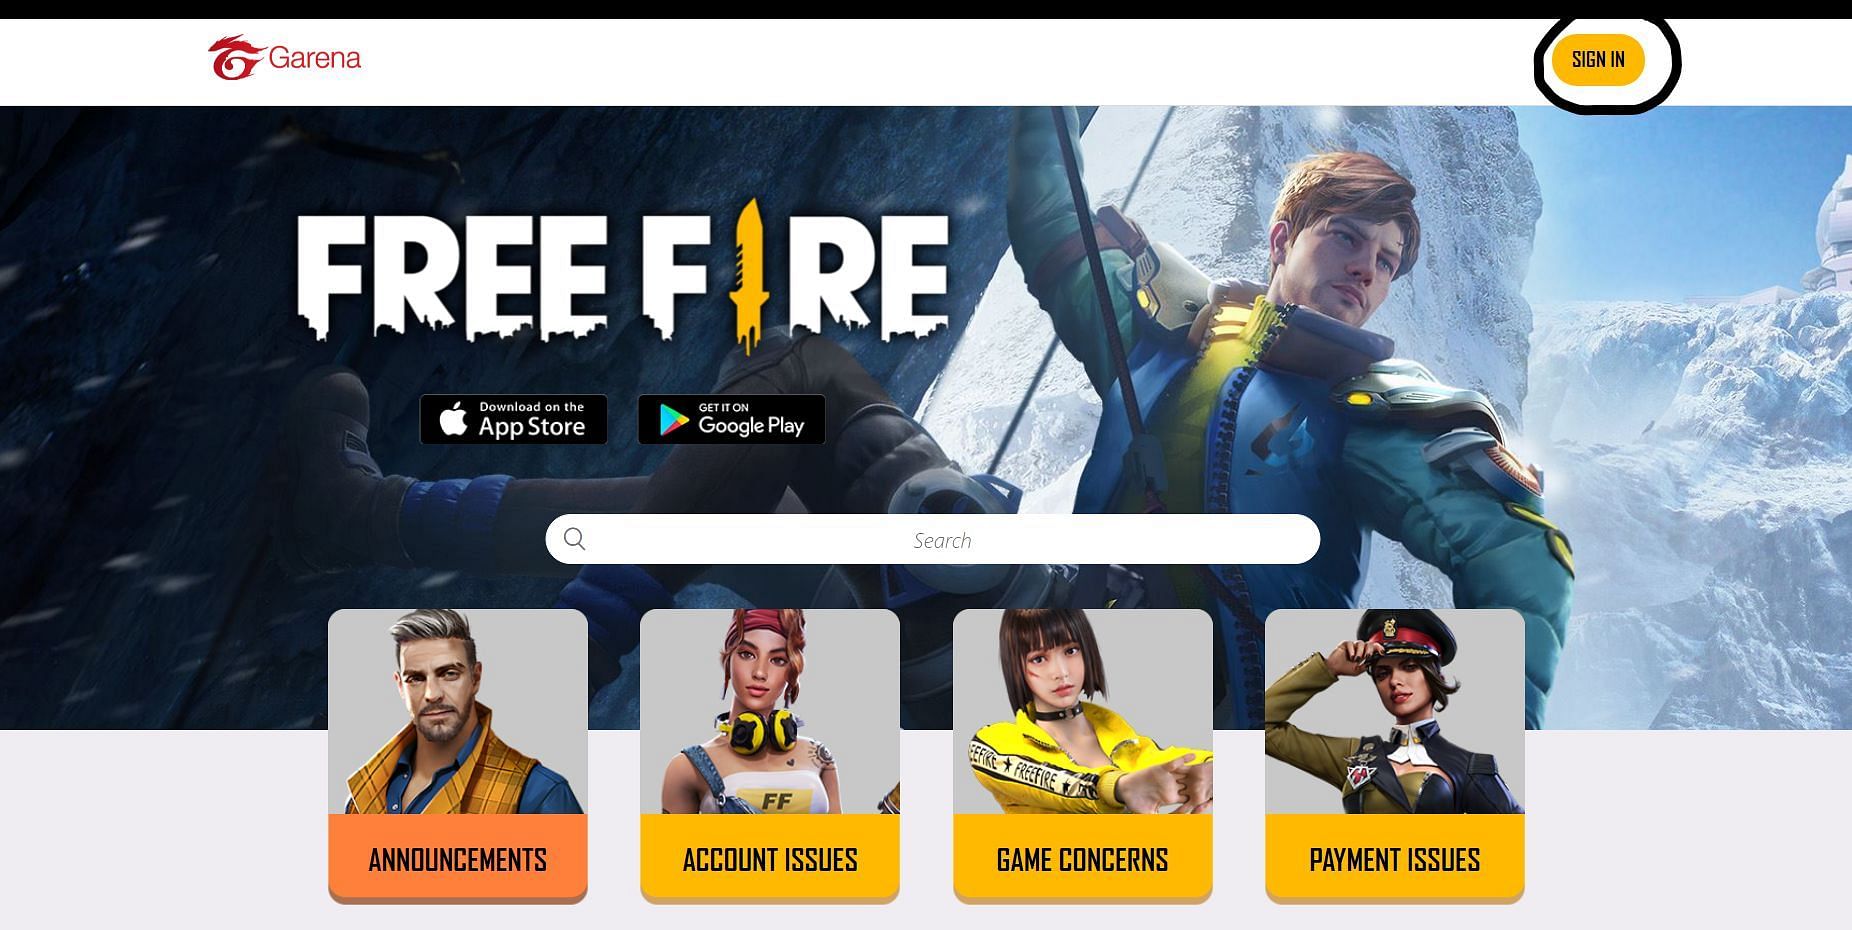 Free Fire Unban Date: When is it likely to be available to download again?